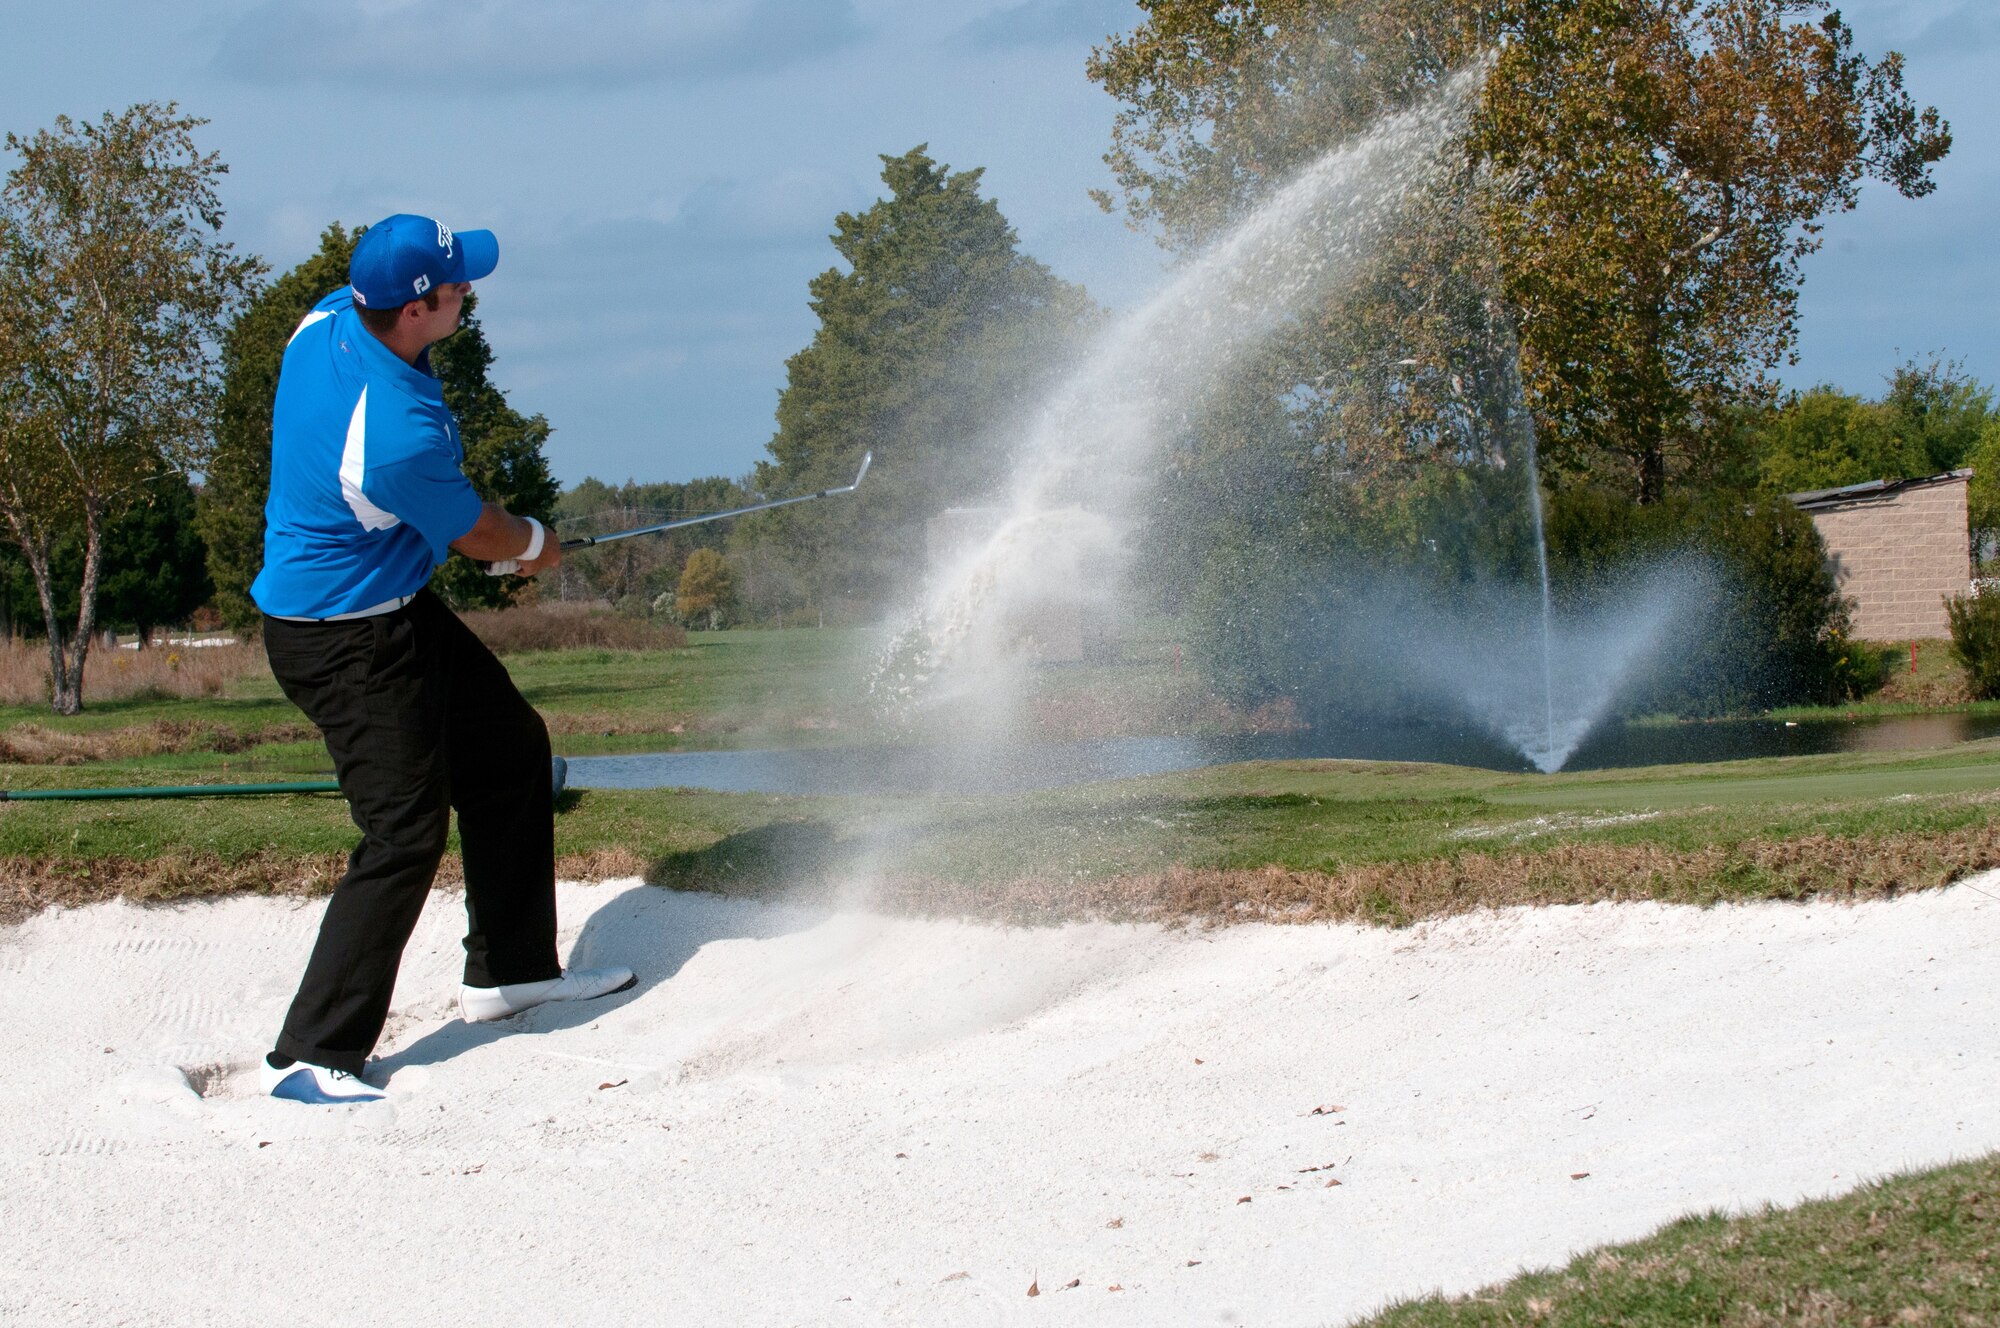 LANGLEY AIR FORCE BASE, Va. – U.S. Air Force golfer Thomas Whitney, of Vandenberg Air Force Base, drives the ball from a sand bunker during the Air Force Golf Championship Oct. 19. Air Force personnel from around the world competed in the tournament to advance on to the Armed Forces Golf Championship. At the conclusion of the Armed Forces competitions, the best players are selected to represent the U.S. at International Military Sports Competitions hosted worldwide or at U.S. national championships. (U.S. Air Force photo/Eric Deagle)